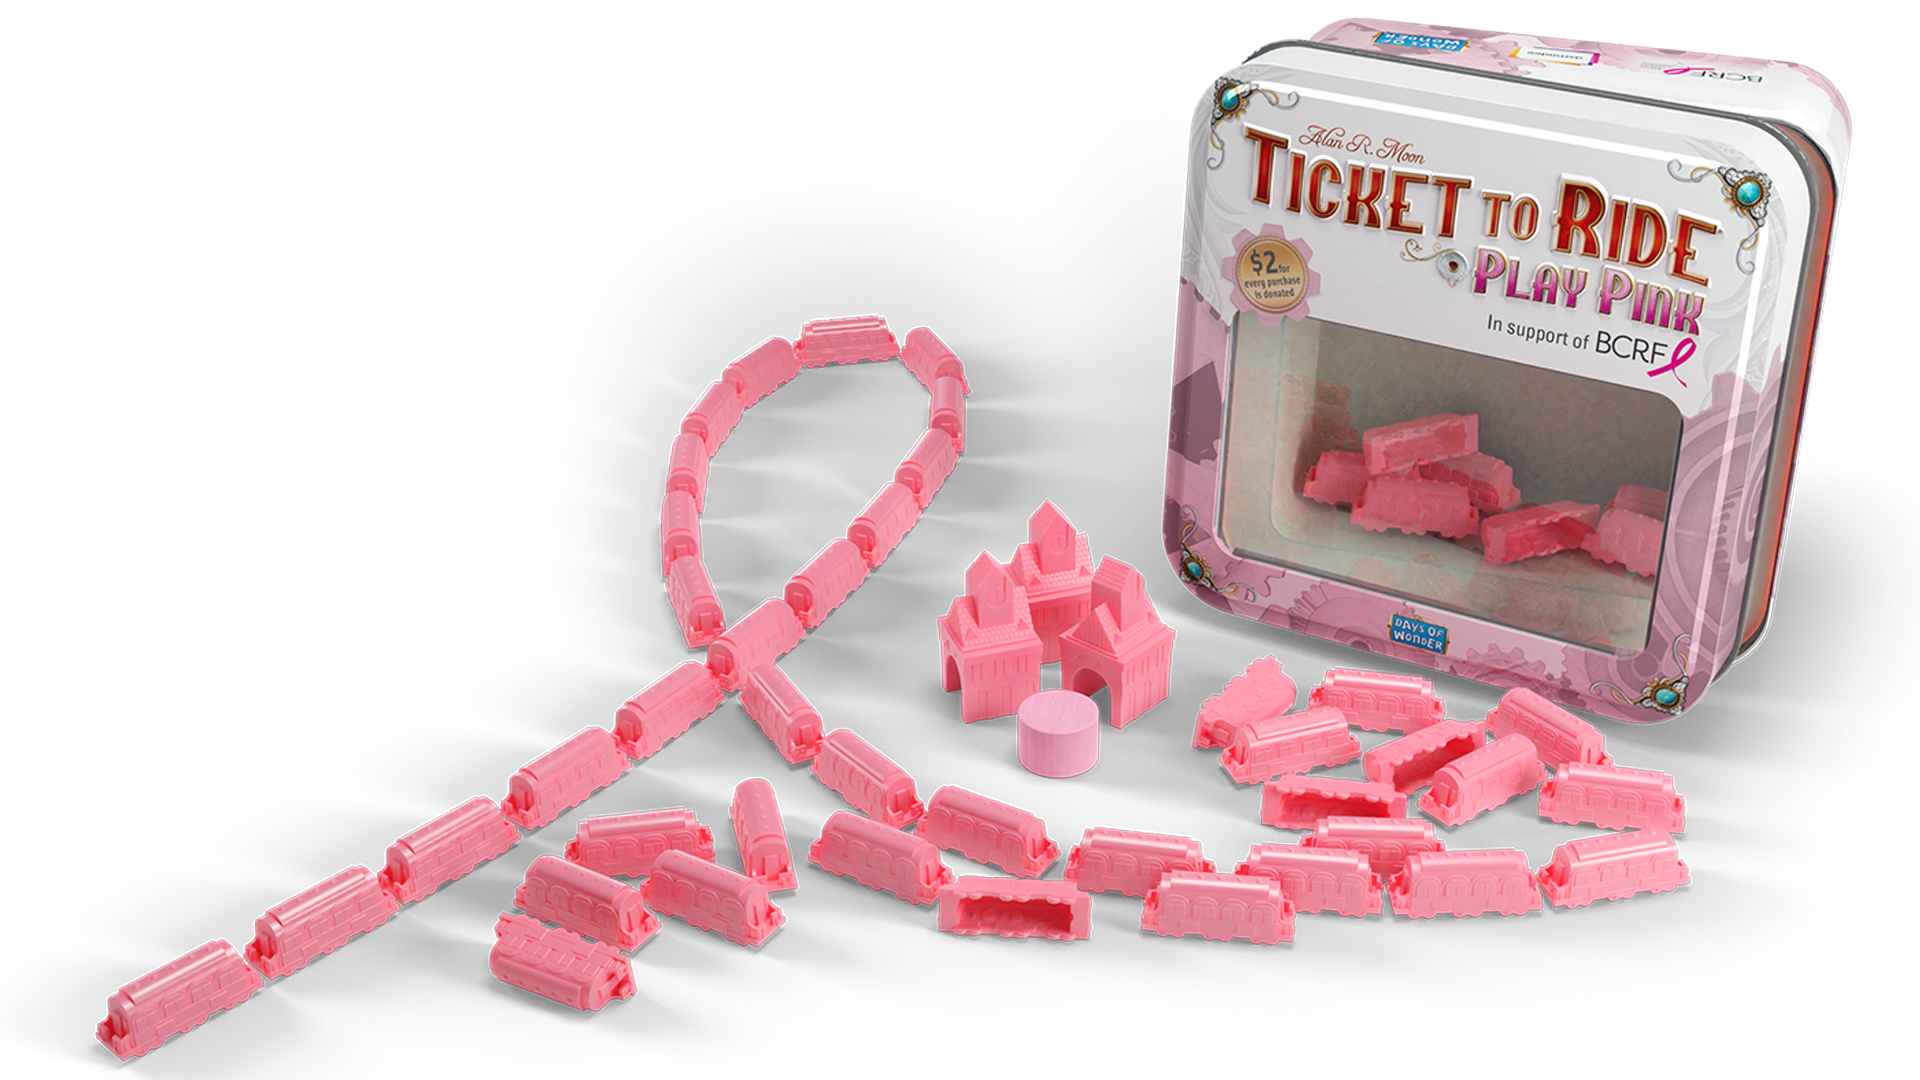 Image for Ticket to Ride gets a set of pink trains to benefit breast cancer research charity